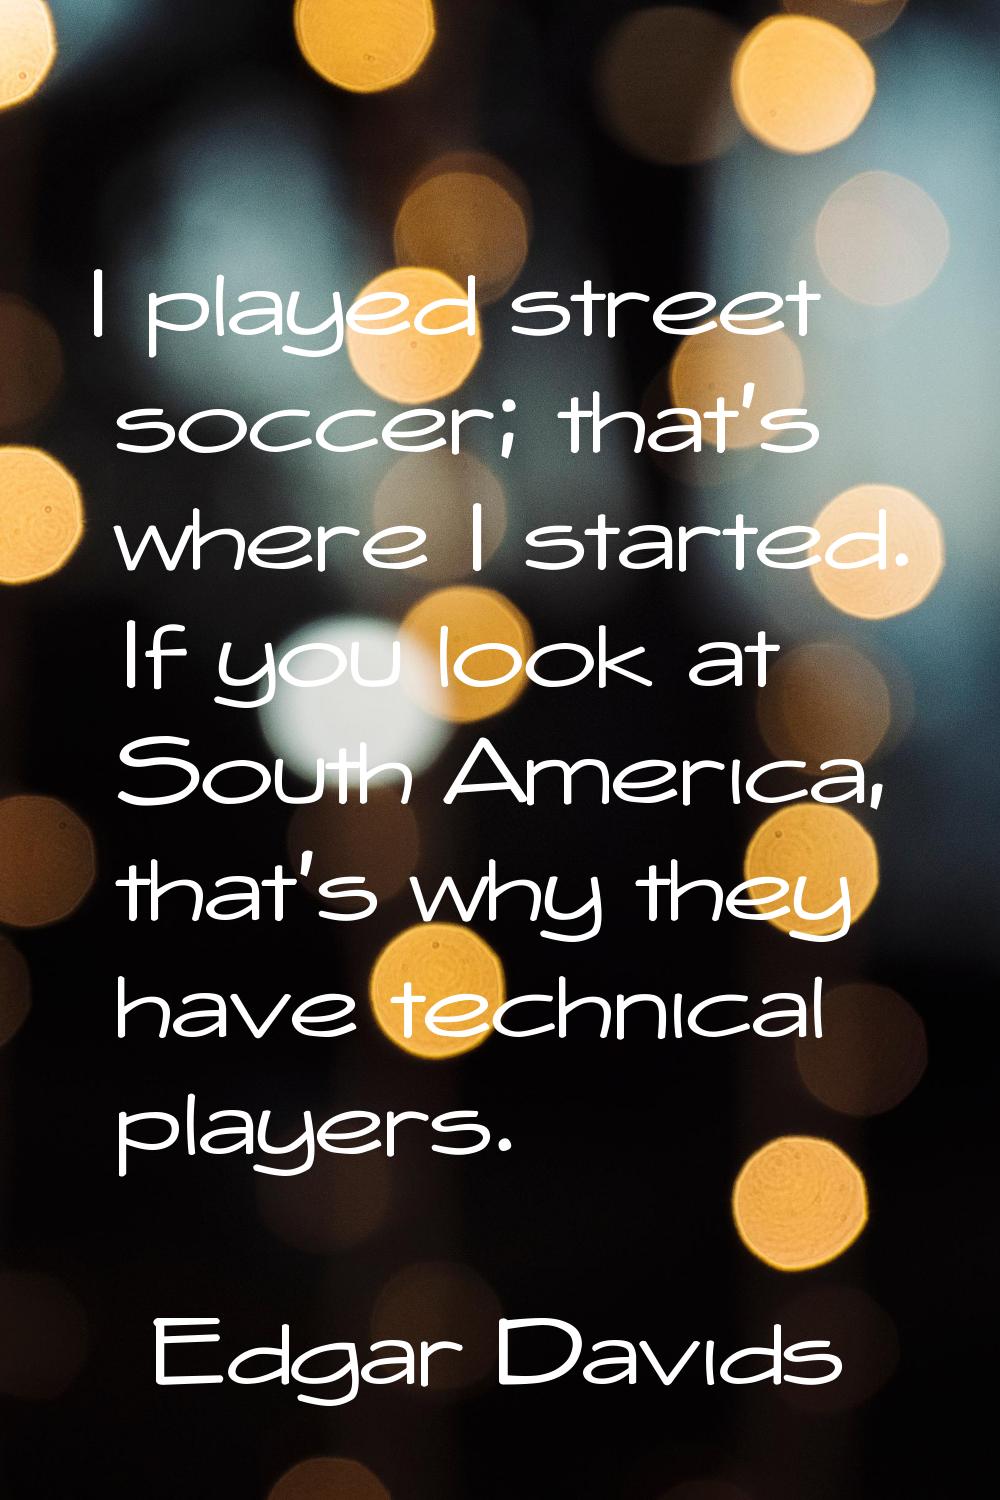 I played street soccer; that's where I started. If you look at South America, that's why they have 